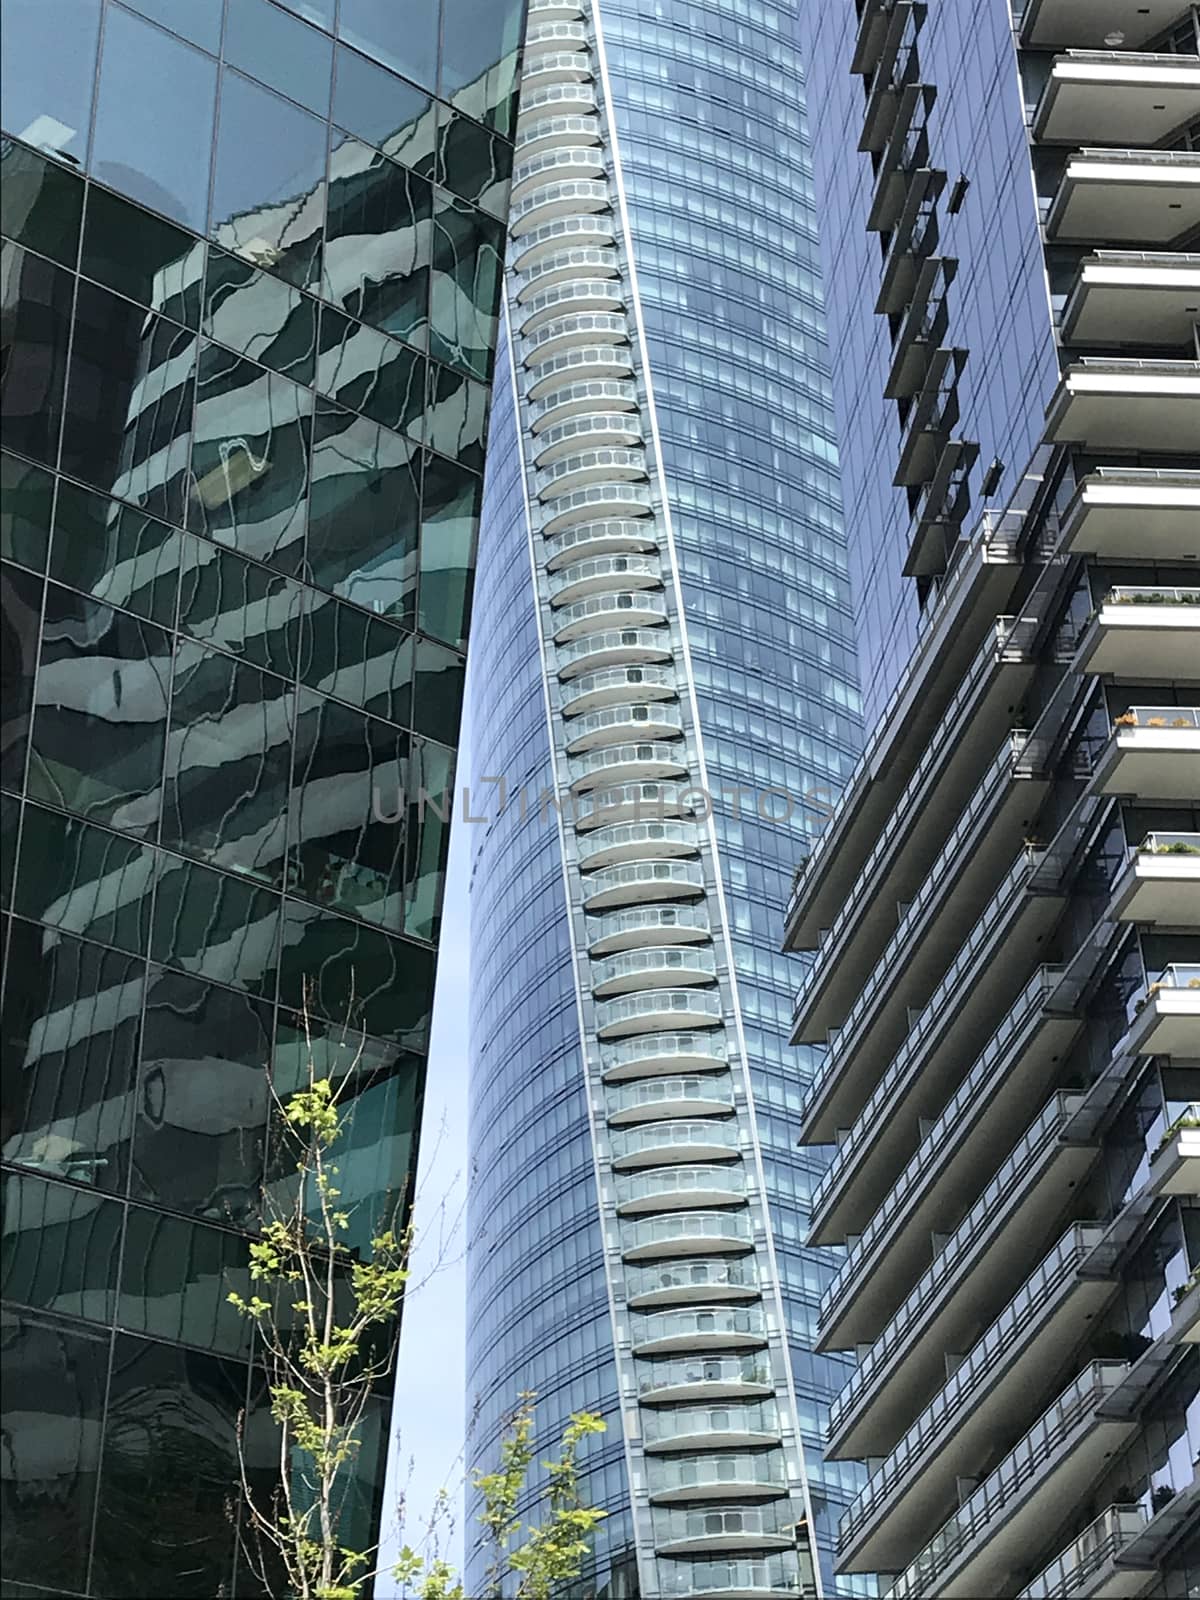 Skyscrapers architecture modern buildings glass tower in Vancouver by 1shostak